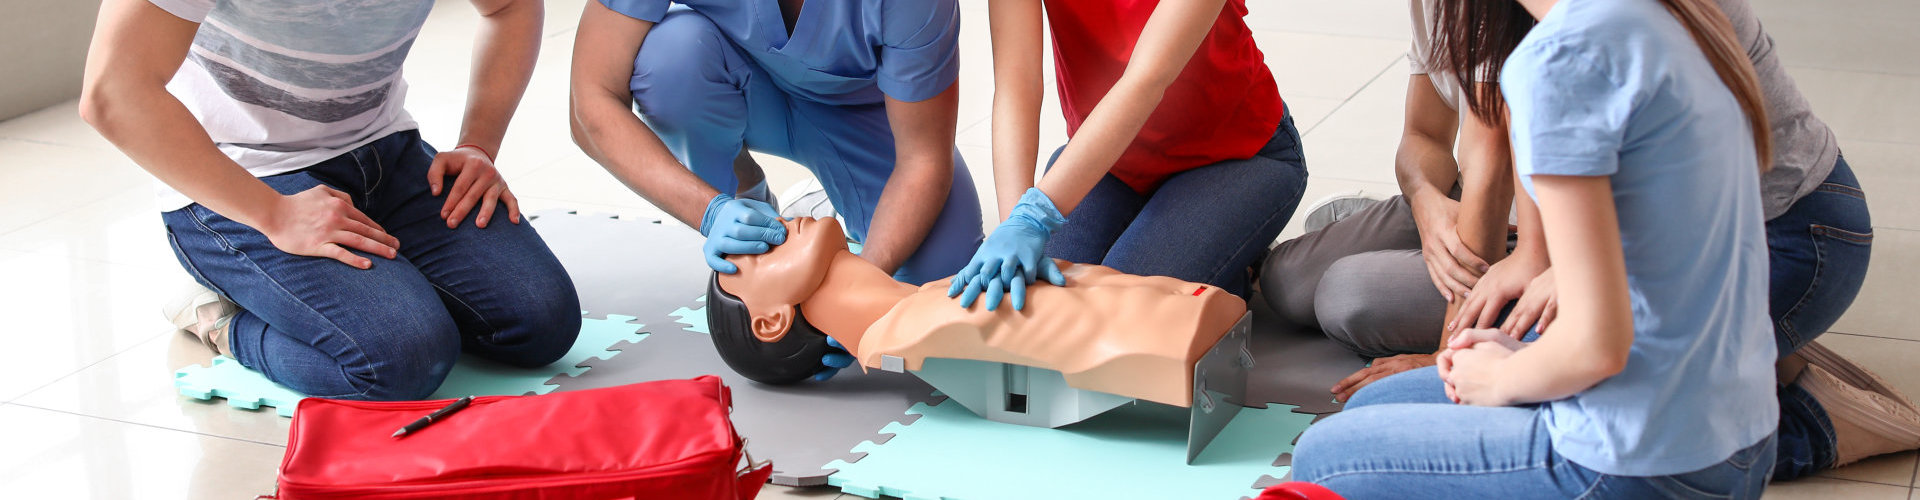 people doing cpr training